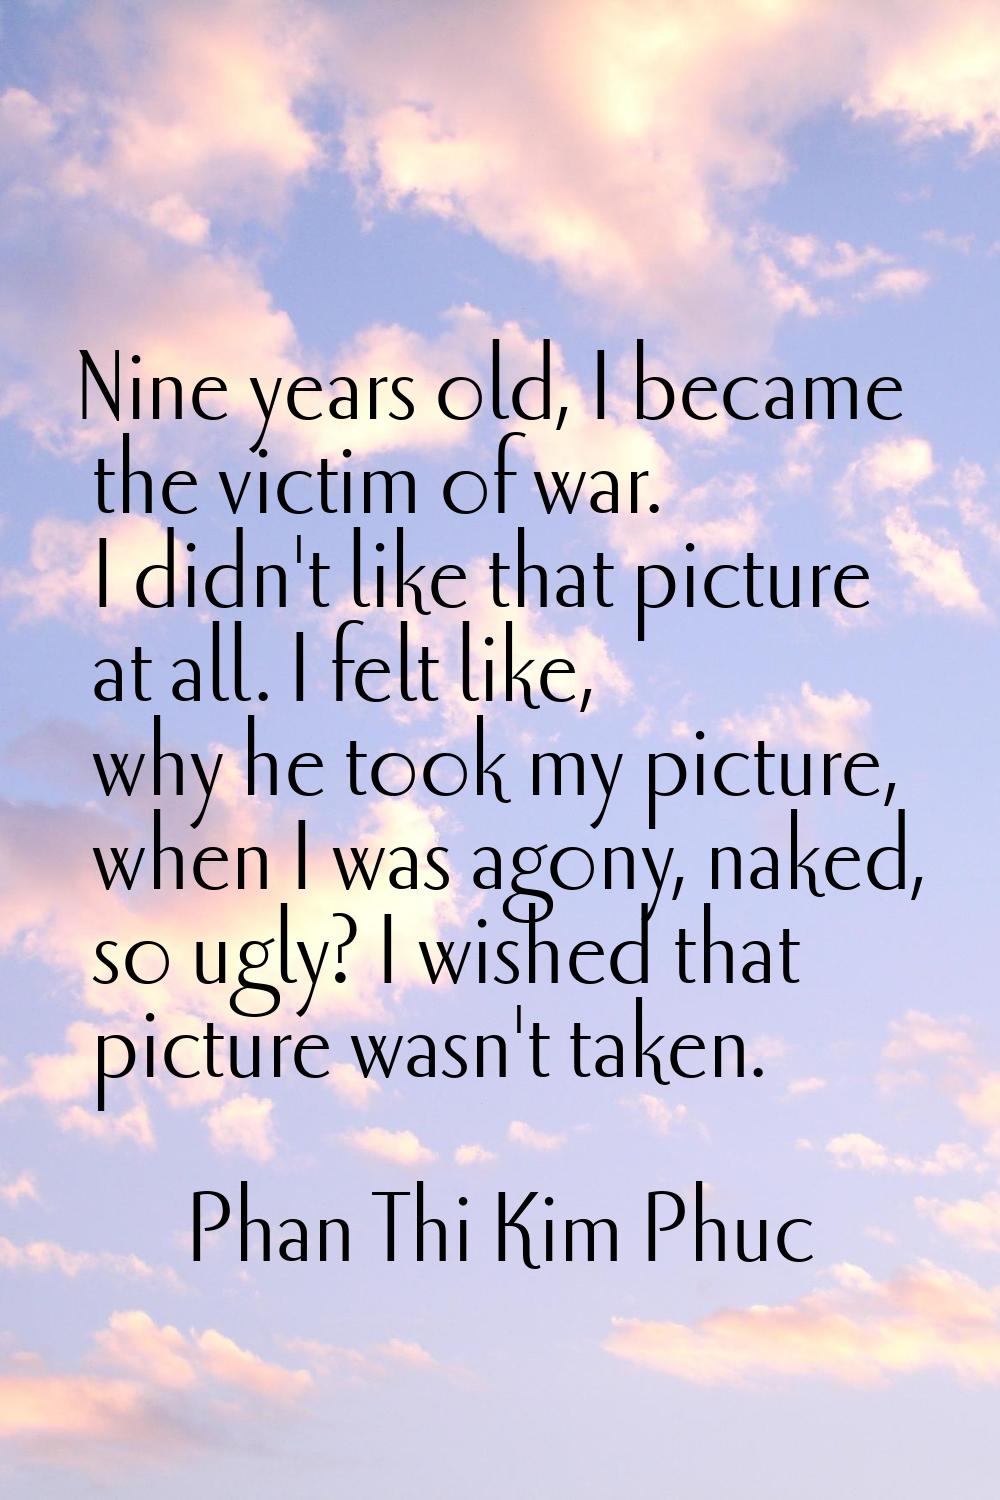 Nine years old, I became the victim of war. I didn't like that picture at all. I felt like, why he 